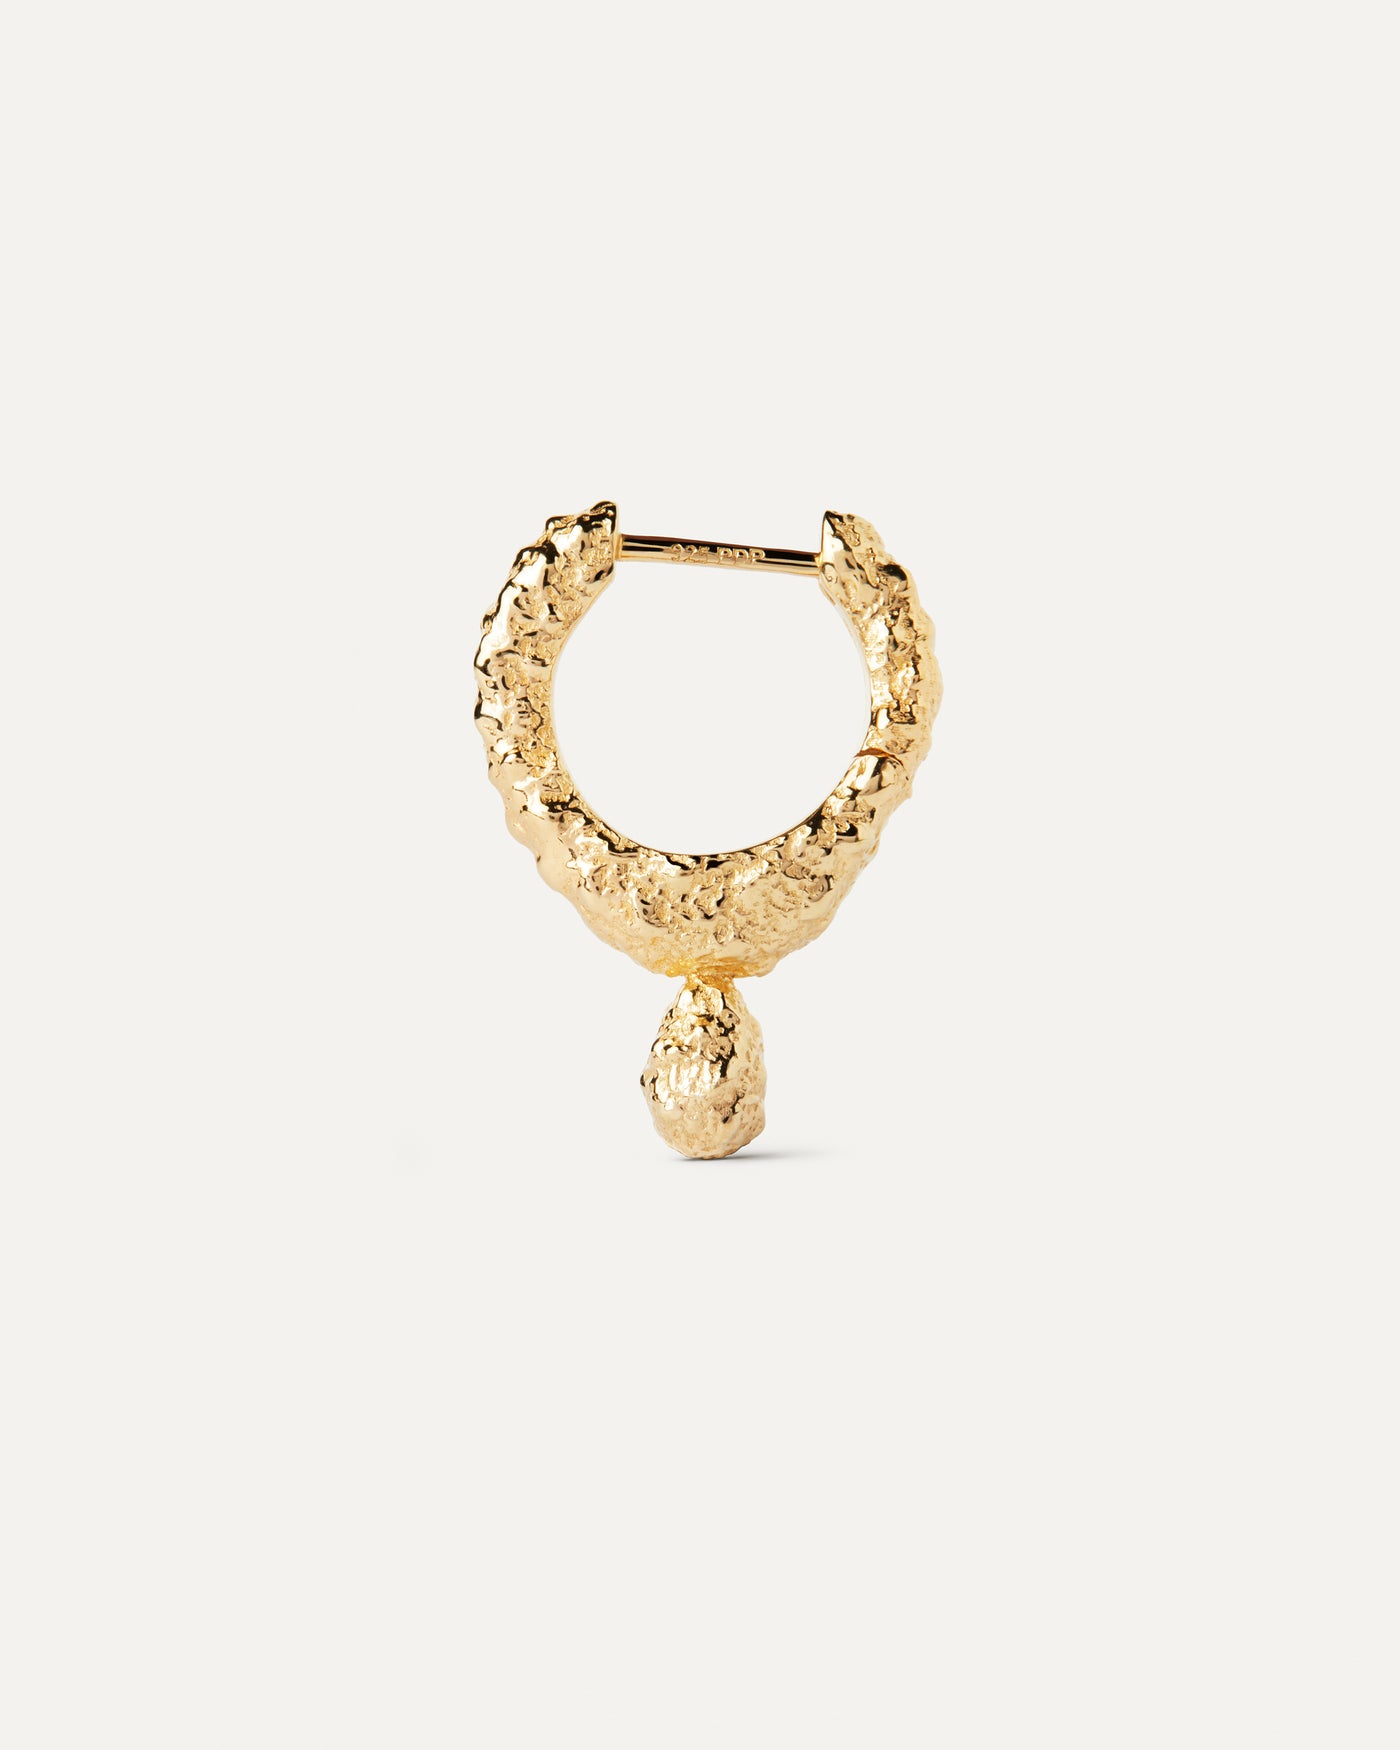 2023 Selection | Lava Single Hoop. Gold-plated fluid shape single hoop with molten texture detail and a drop pendant. Get the latest arrival from PDPAOLA. Place your order safely and get this Best Seller. Free Shipping.